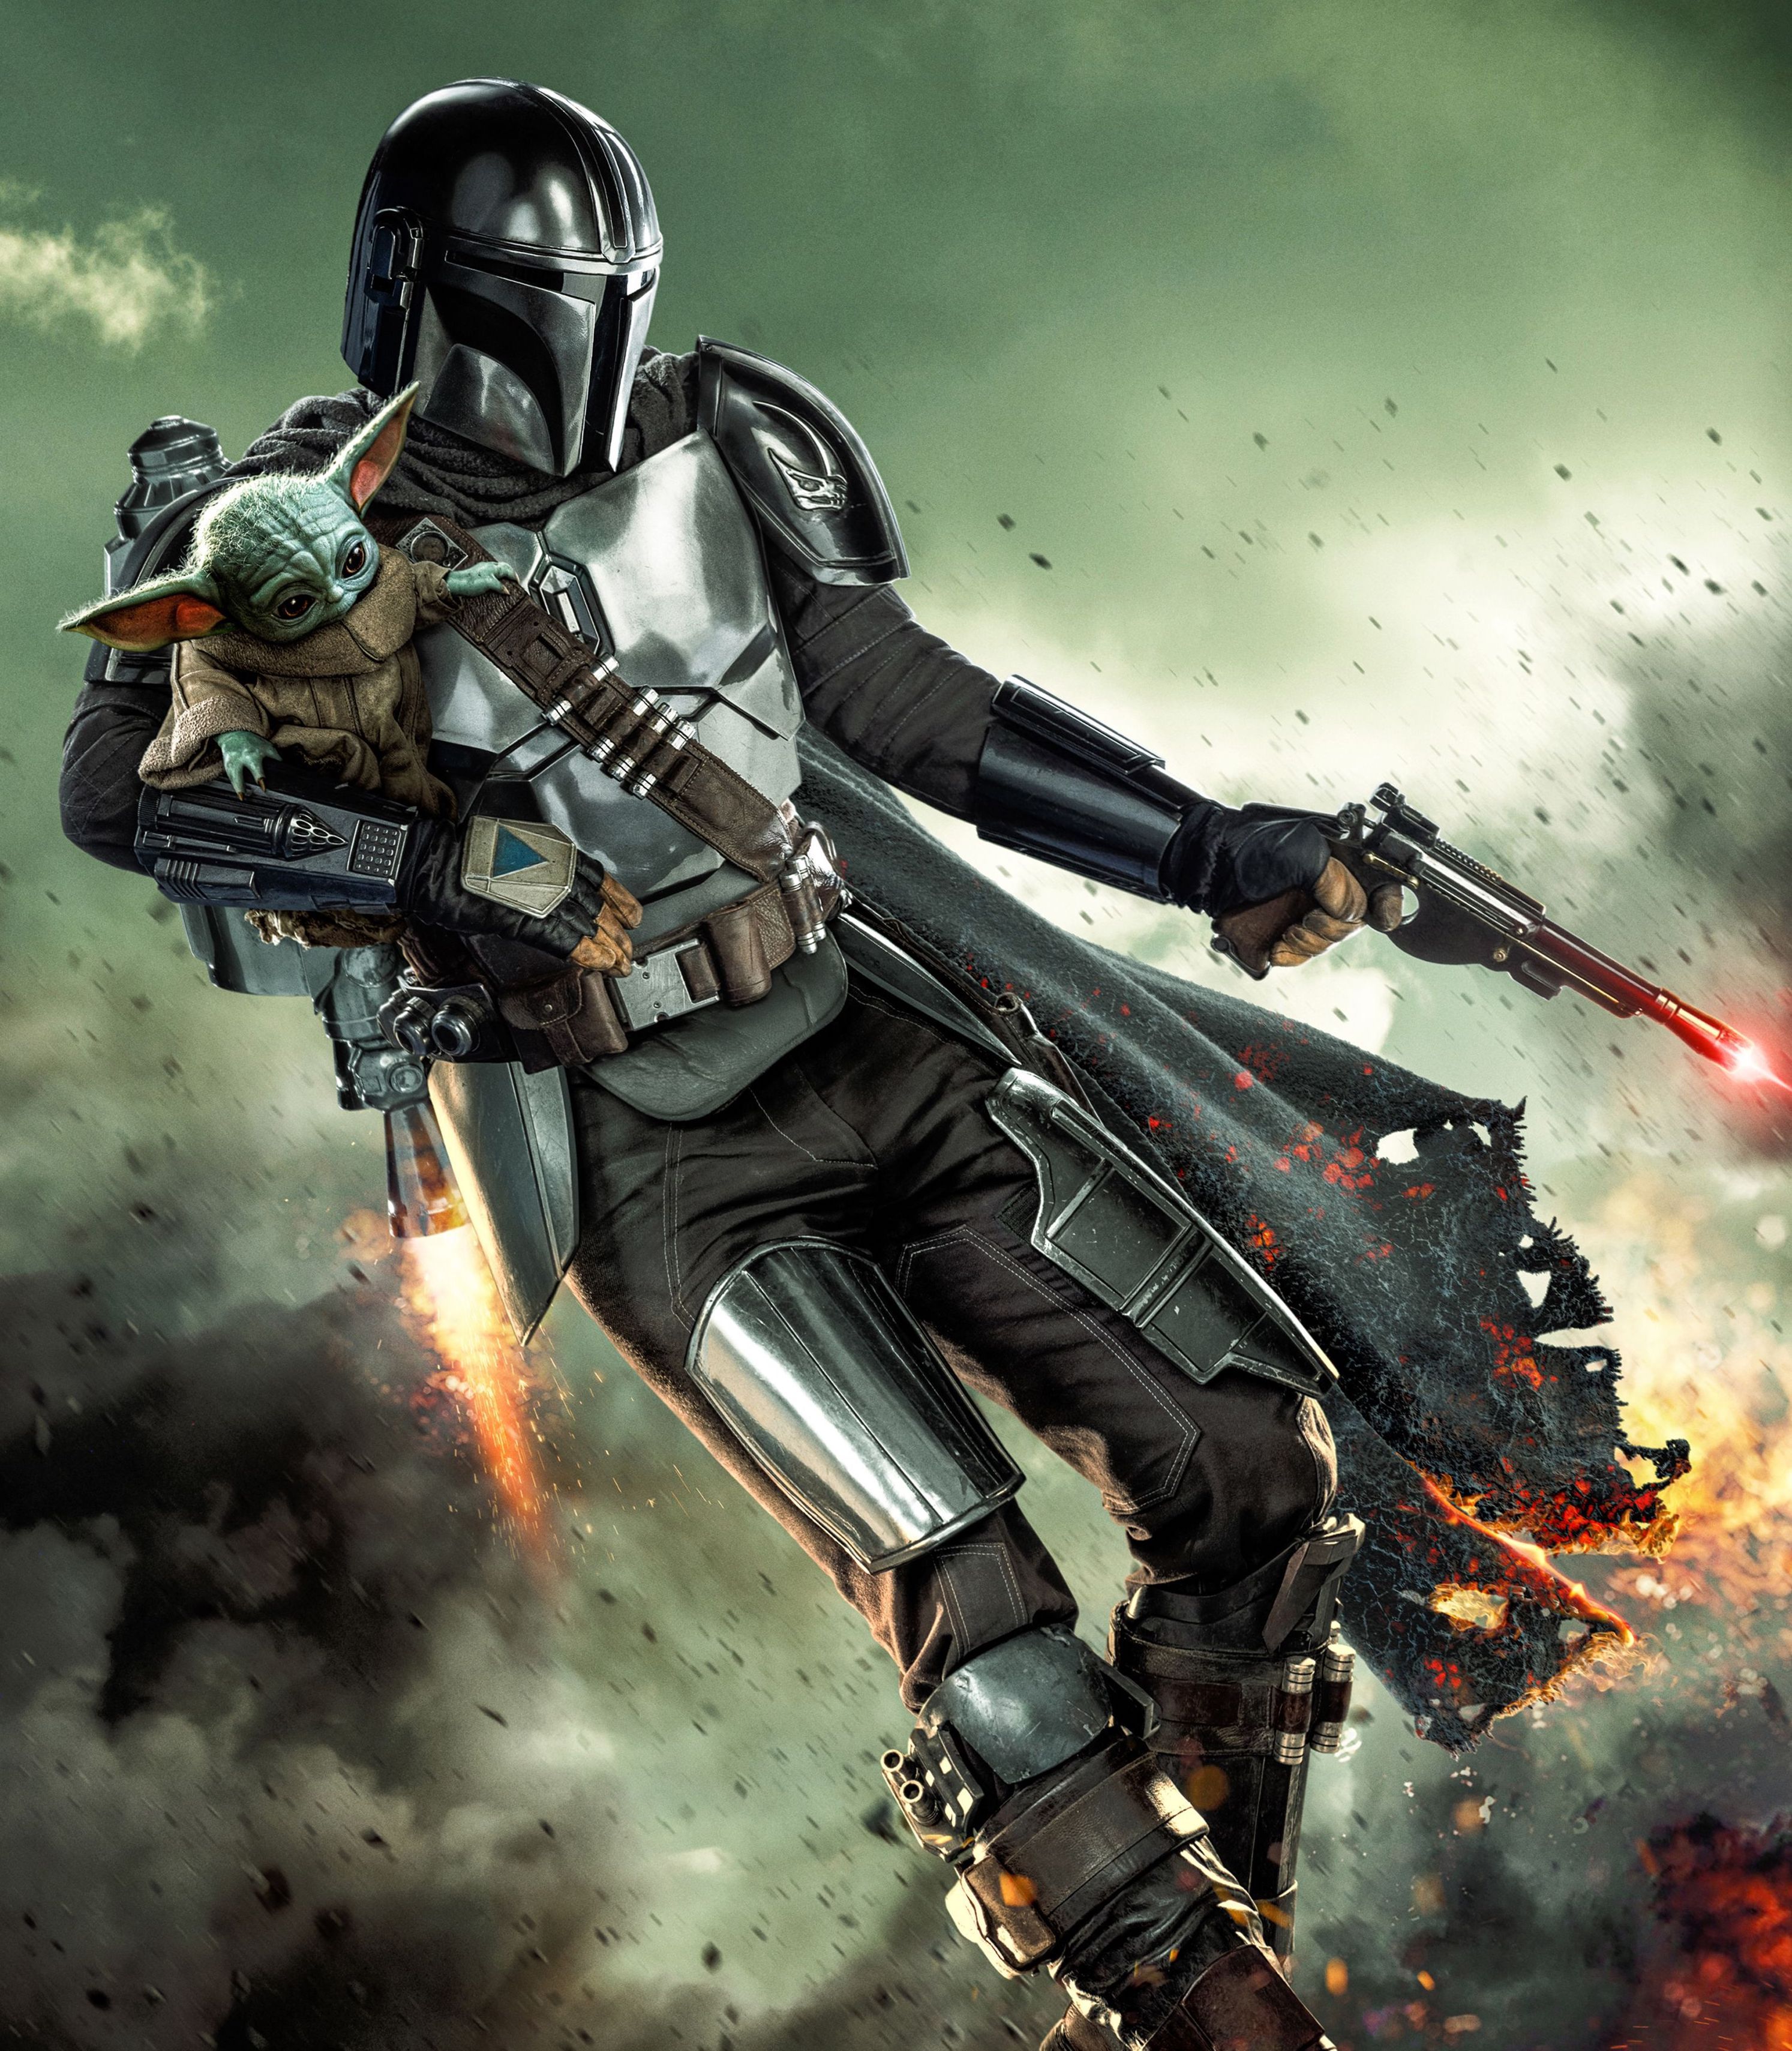 Mandalorian Season 3 official release date is out! - Filmify English